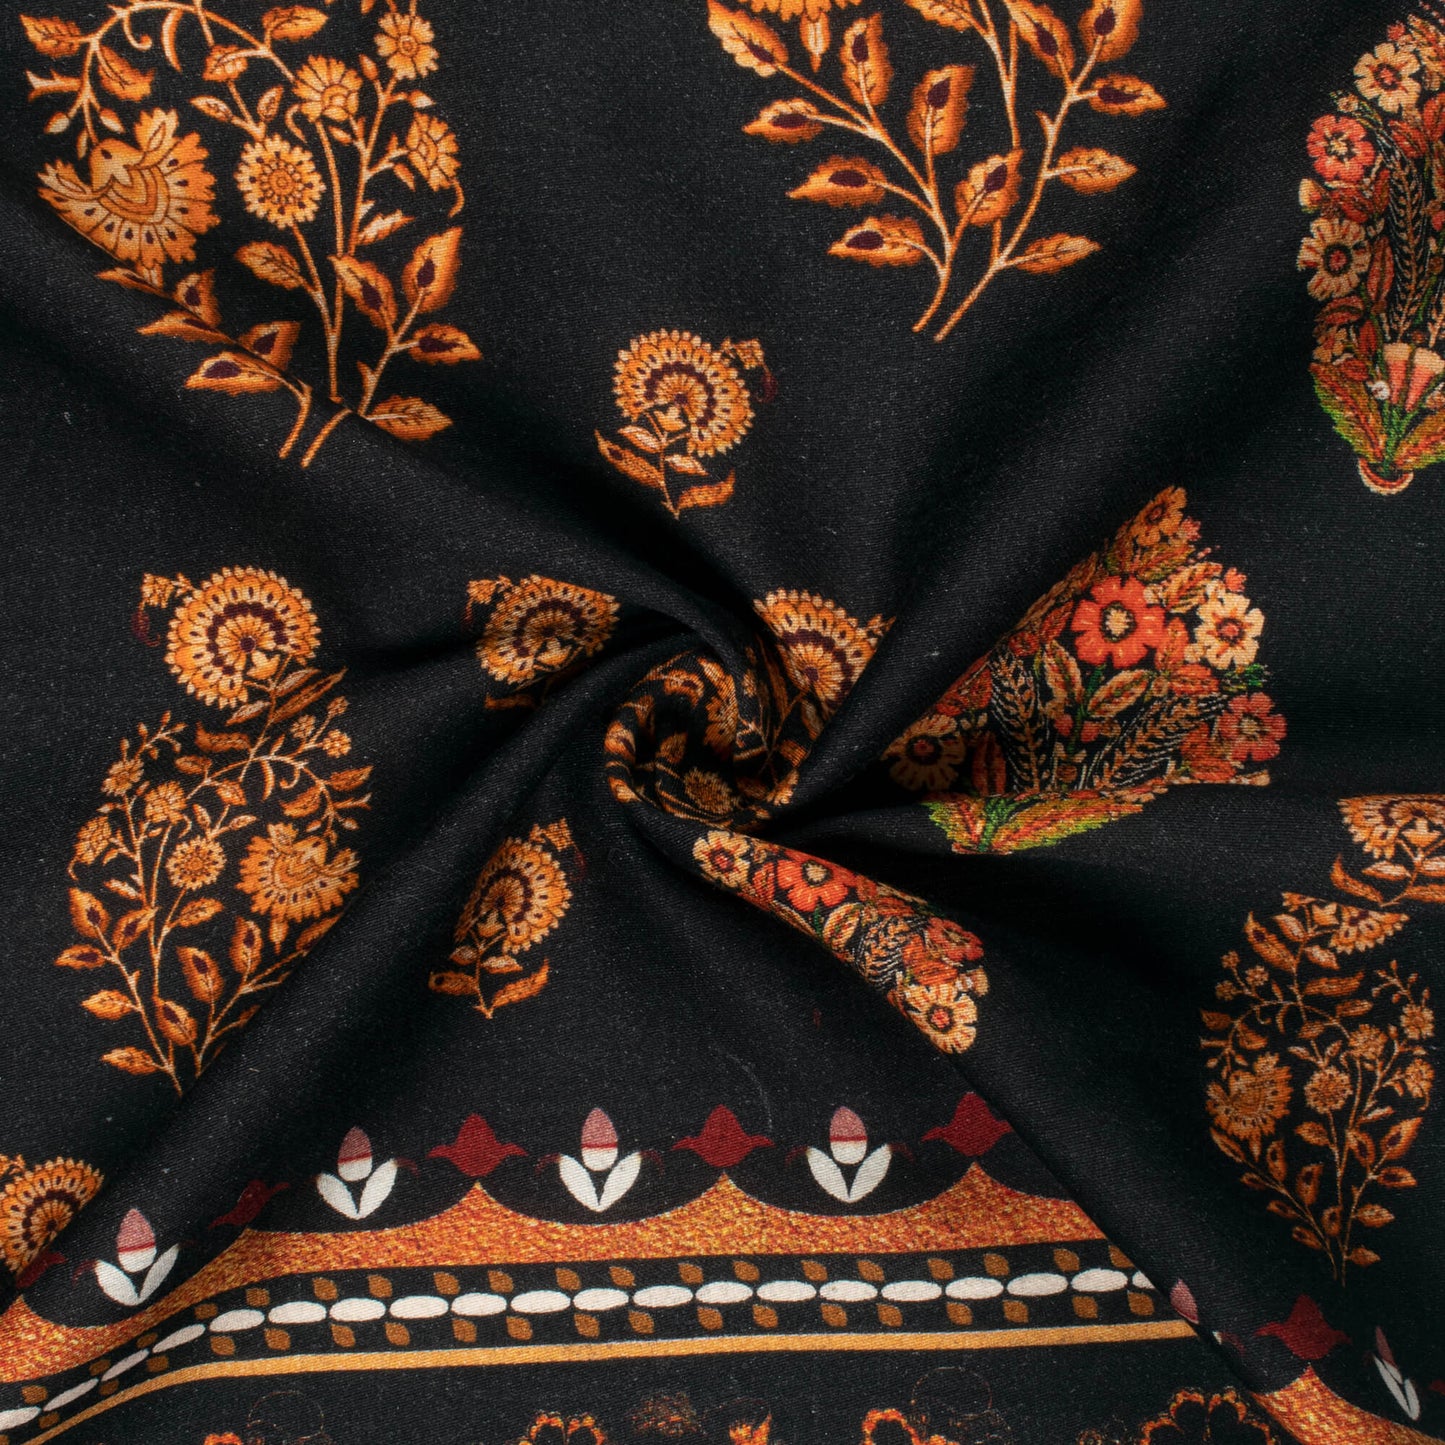 Fire Orange And Black Floral Digital Print Viscose Rayon Fabric(Width 58 Inches)